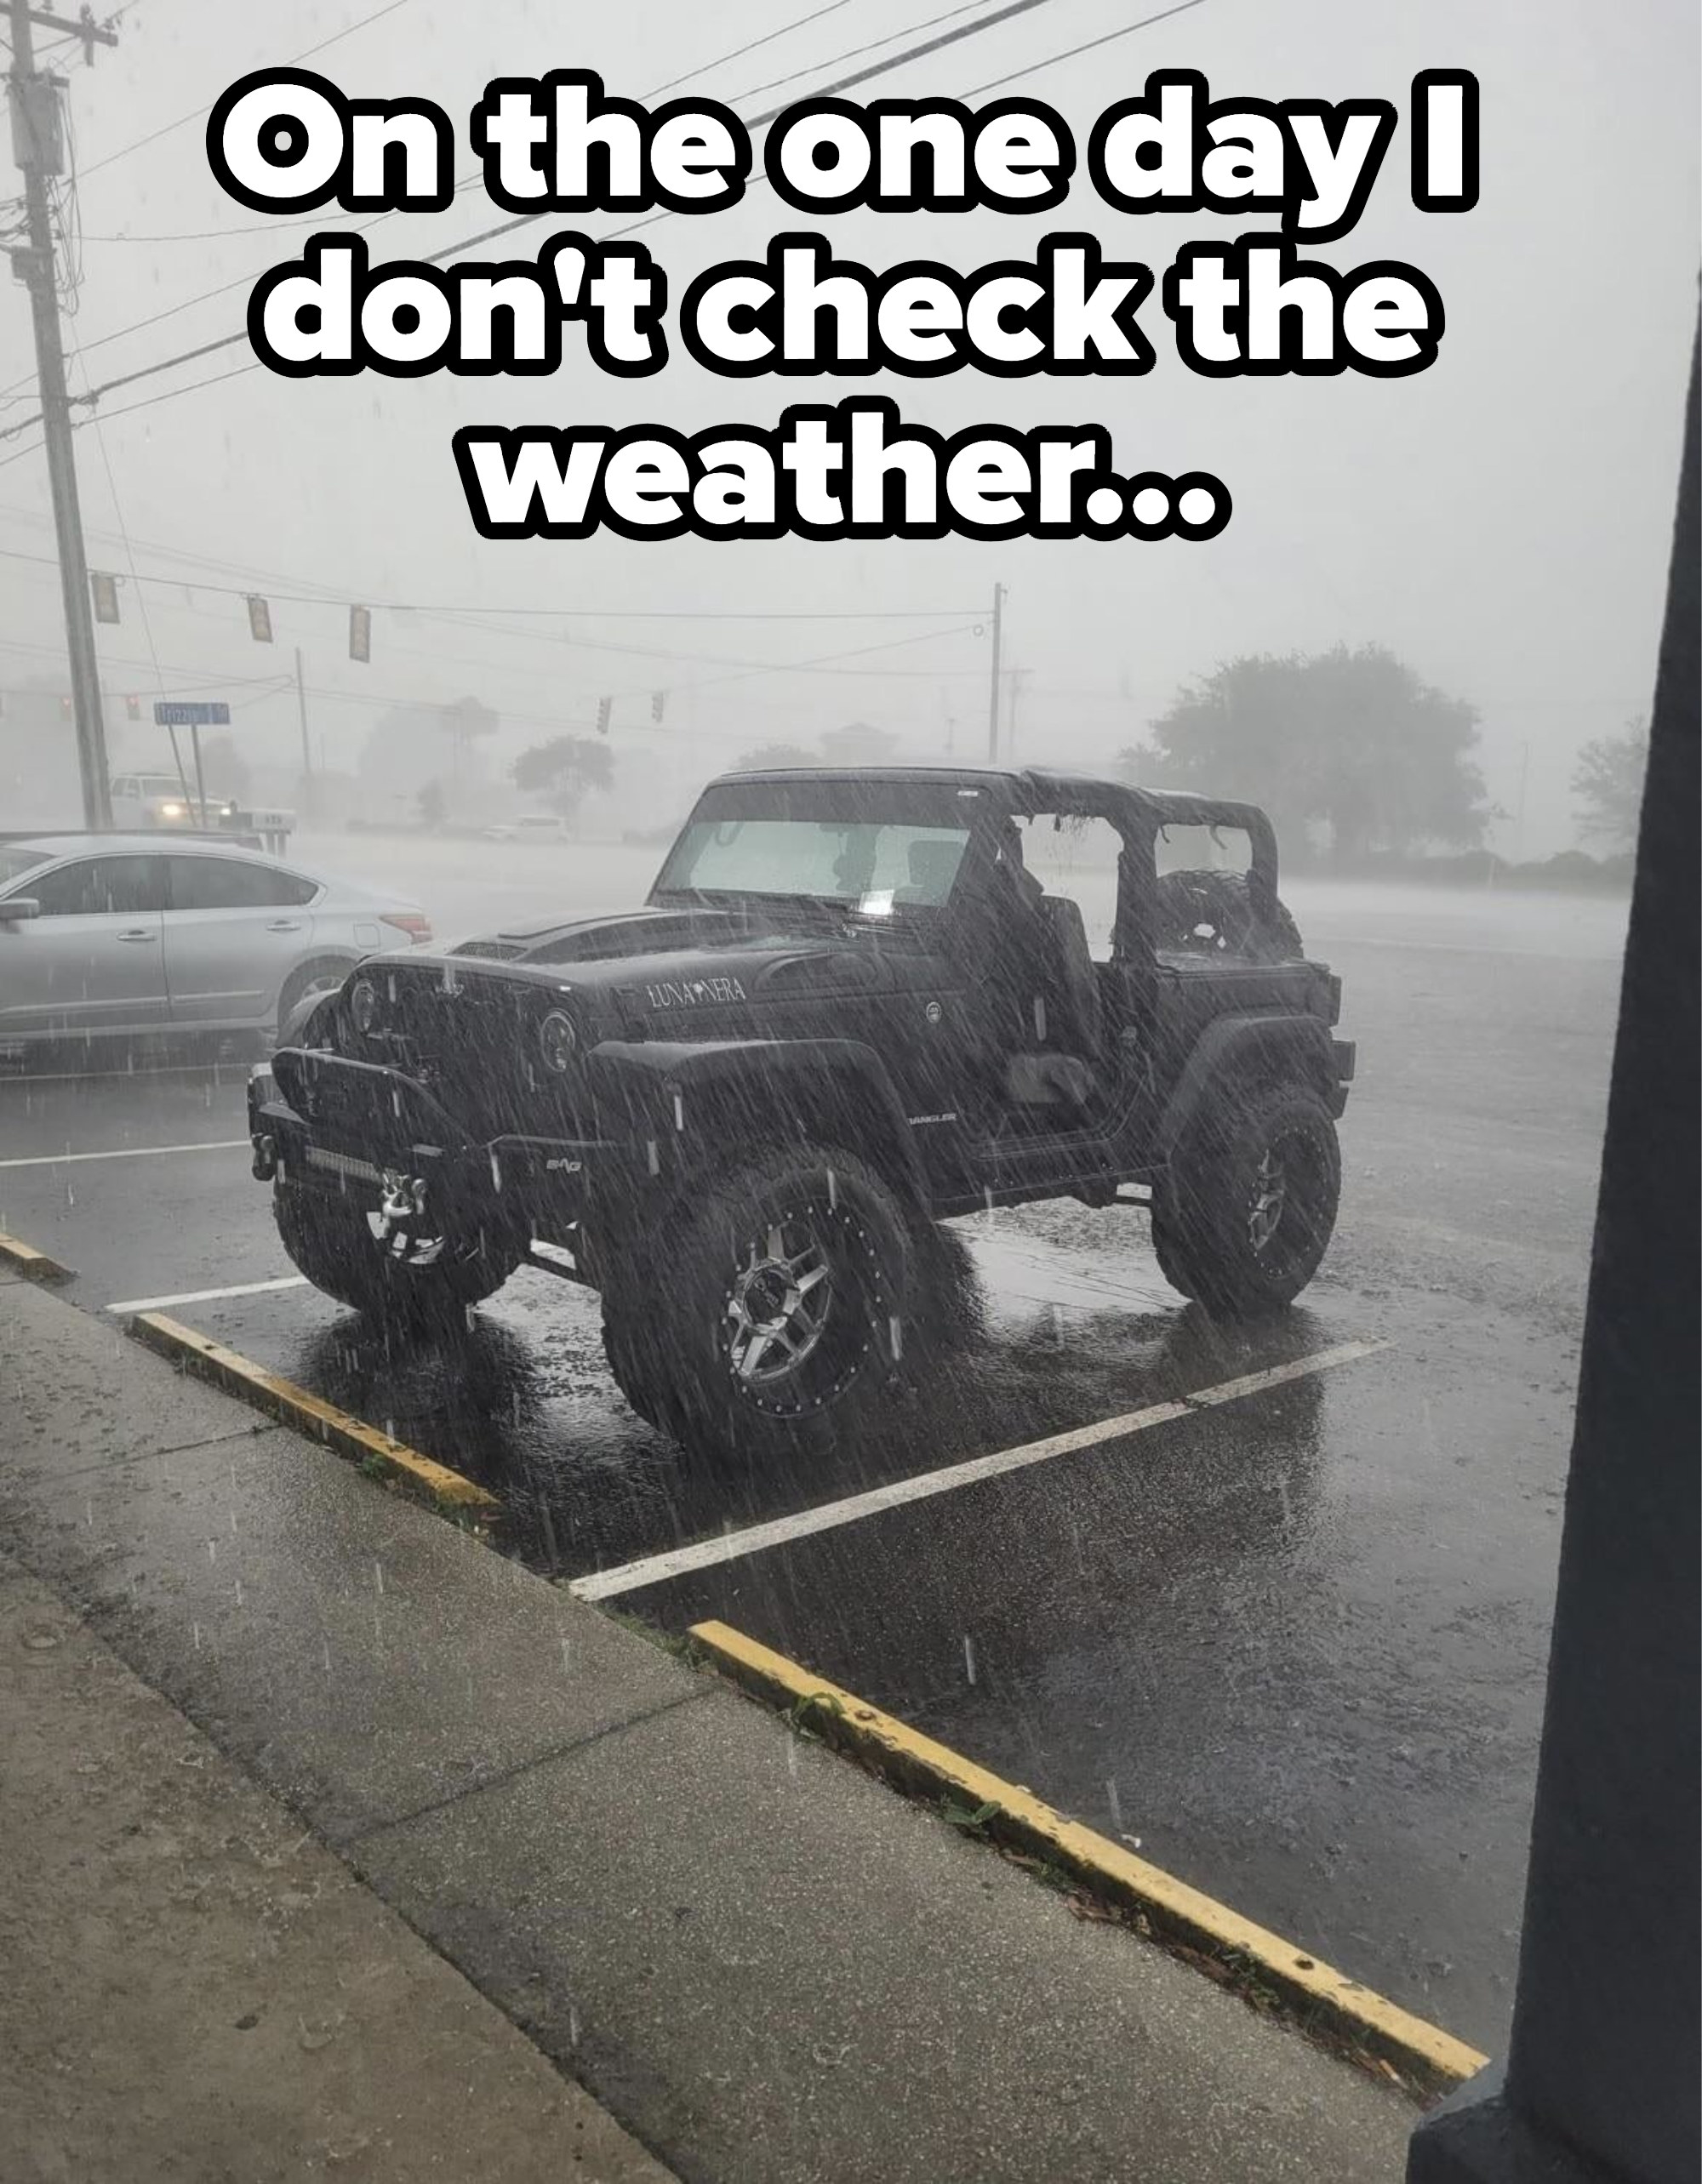 A car in a severe thunder storm